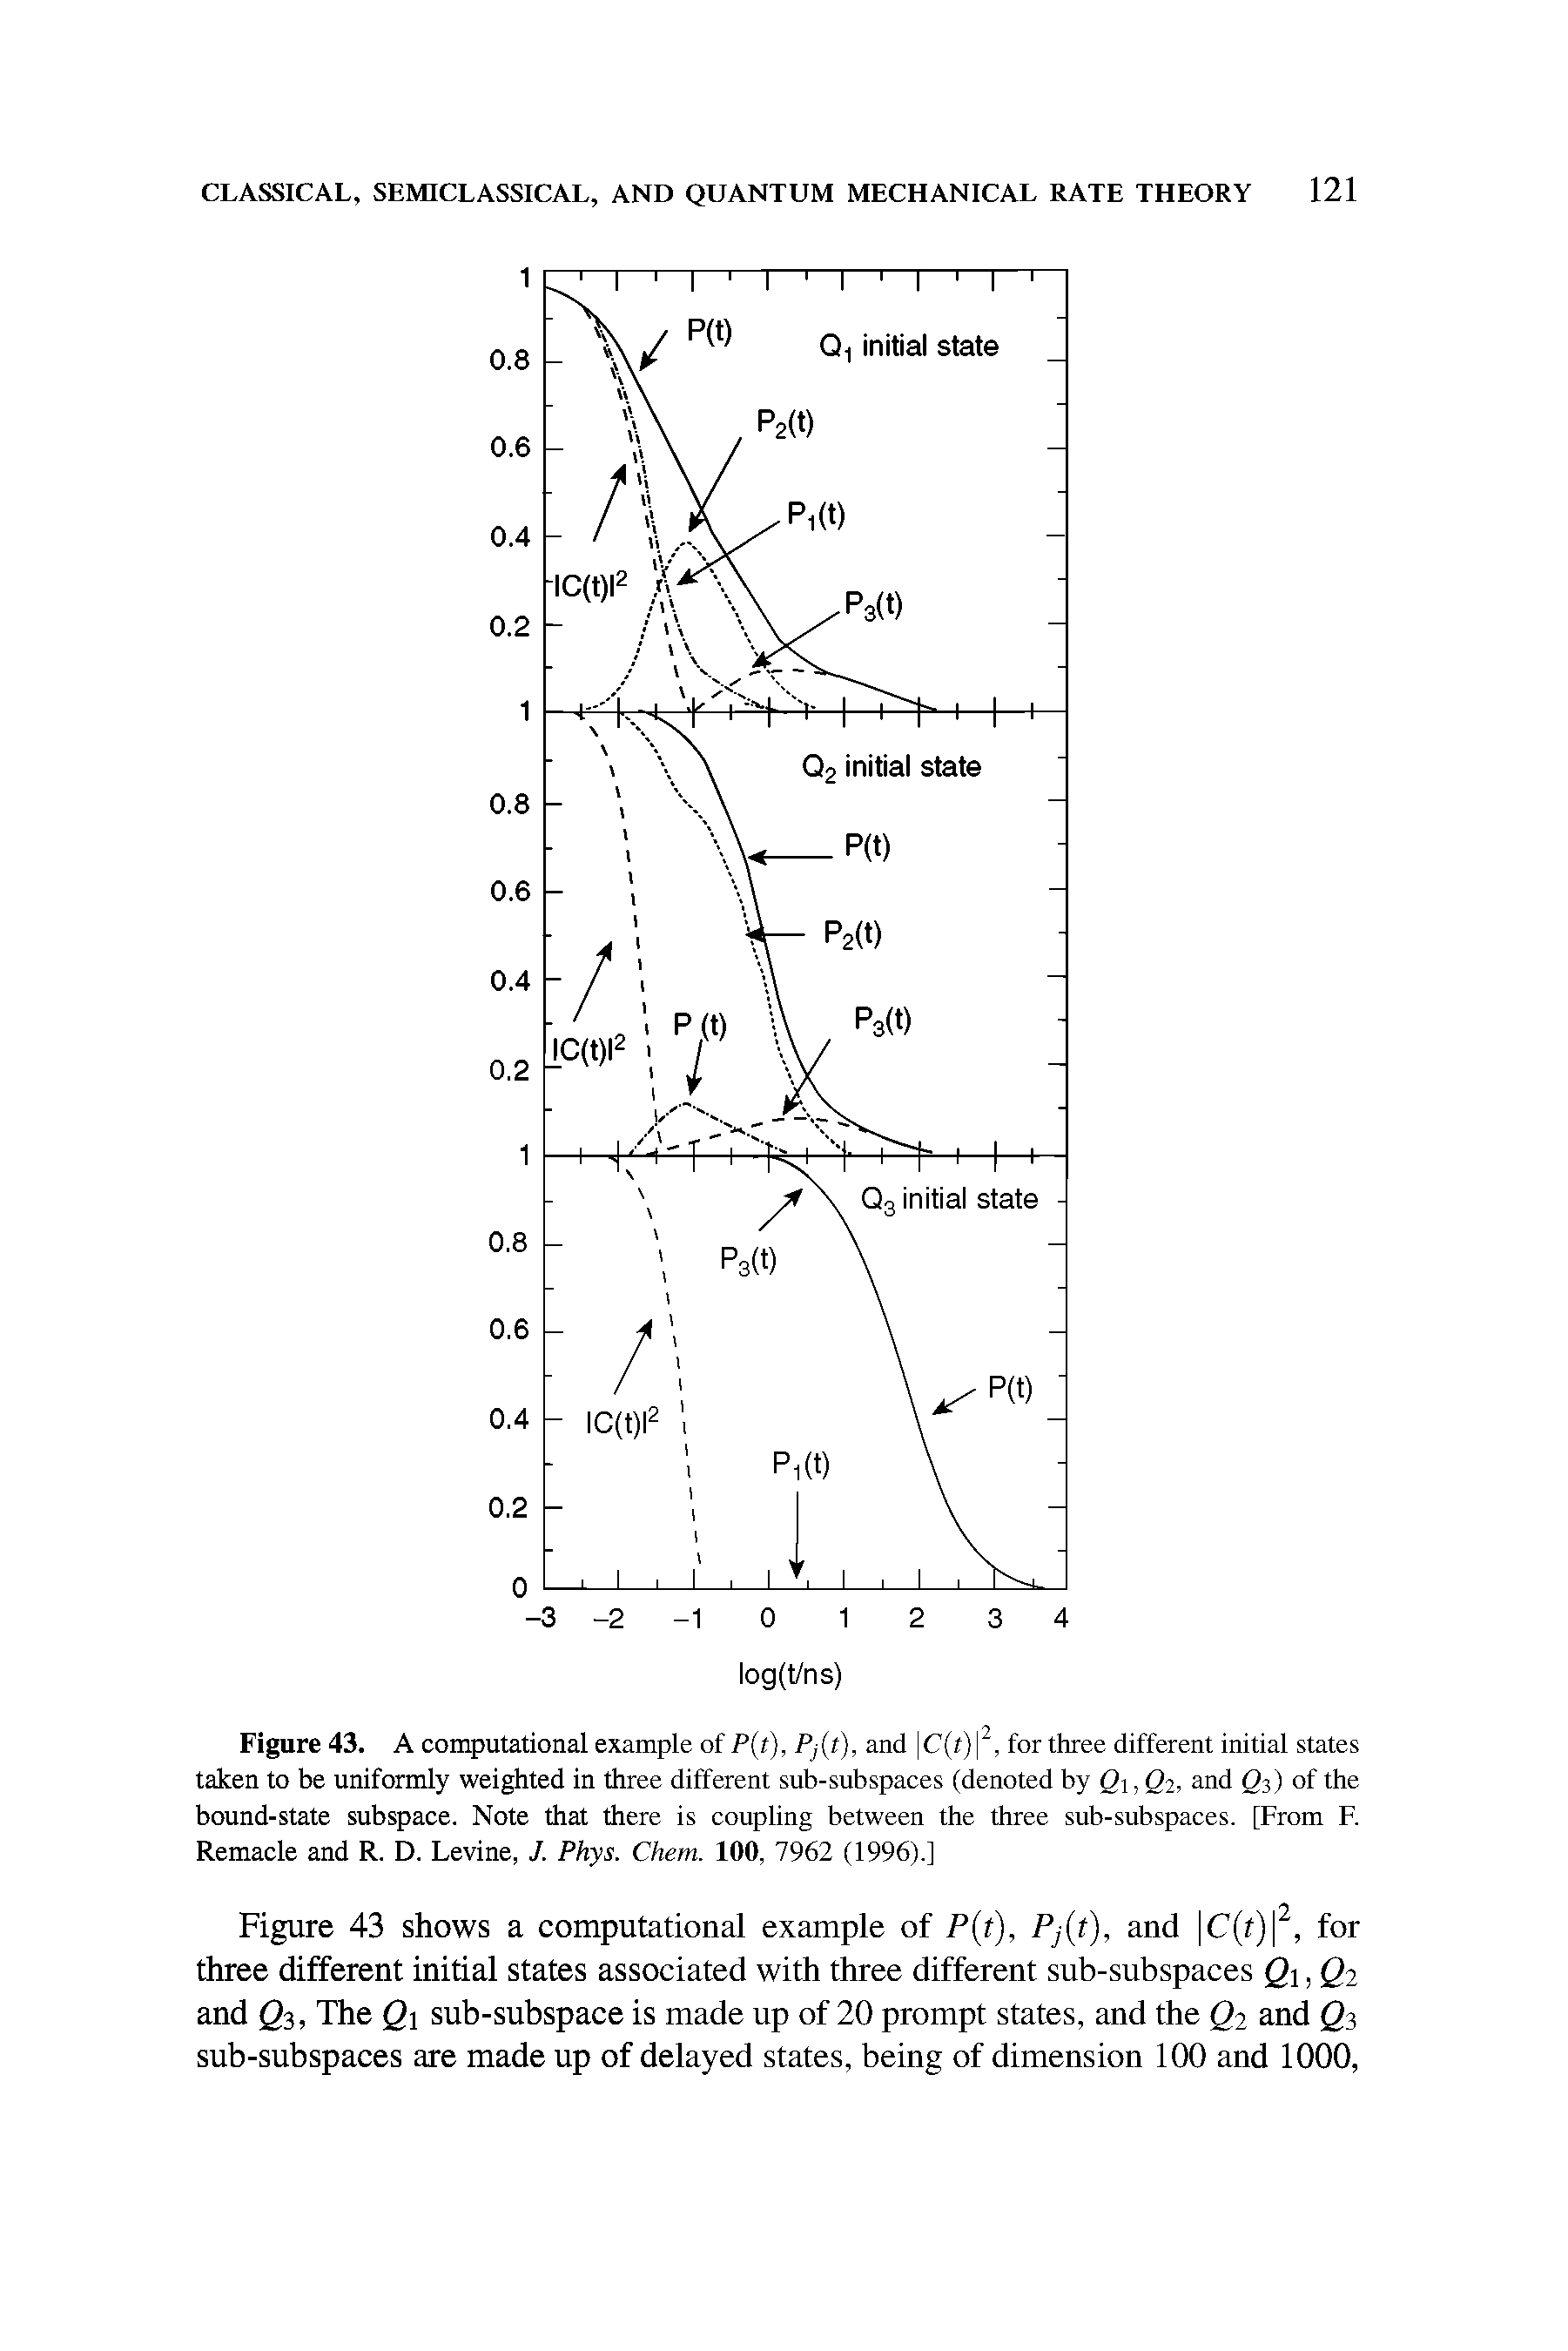 Figure 43. A computational example oi P(t), Pj(t), and C(t), for three different initial states taken to be uniformly weighted in three different sub-subspaces (denoted by gi, Q2, and Q3) of the bound-state subspace. Note that there is coupling between the three sub-subspaces. [From F. Remade and R. D. Levine, J. Phys. Chem. 100, 7962 (1996).]...